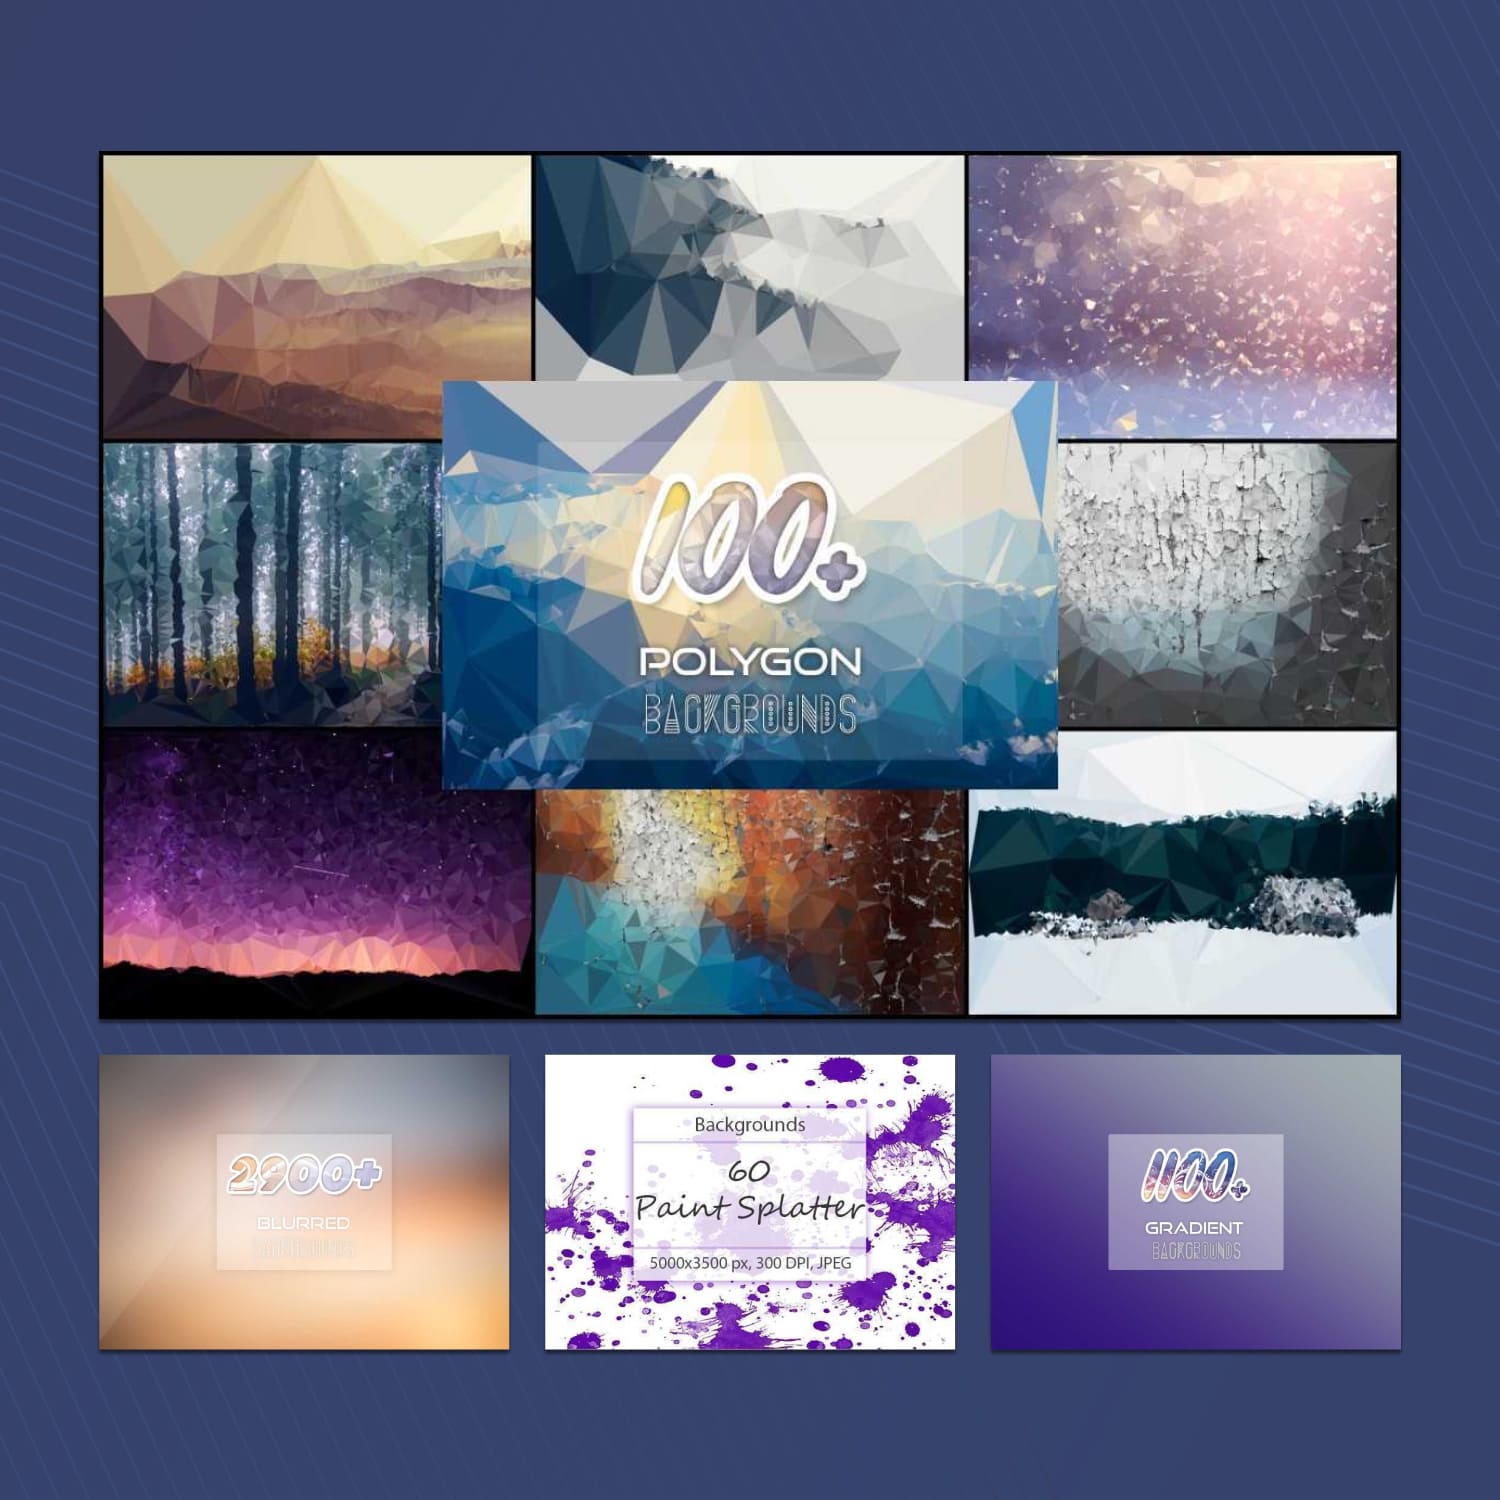 7700+ High-Resolution Backgrounds Bundle cover.